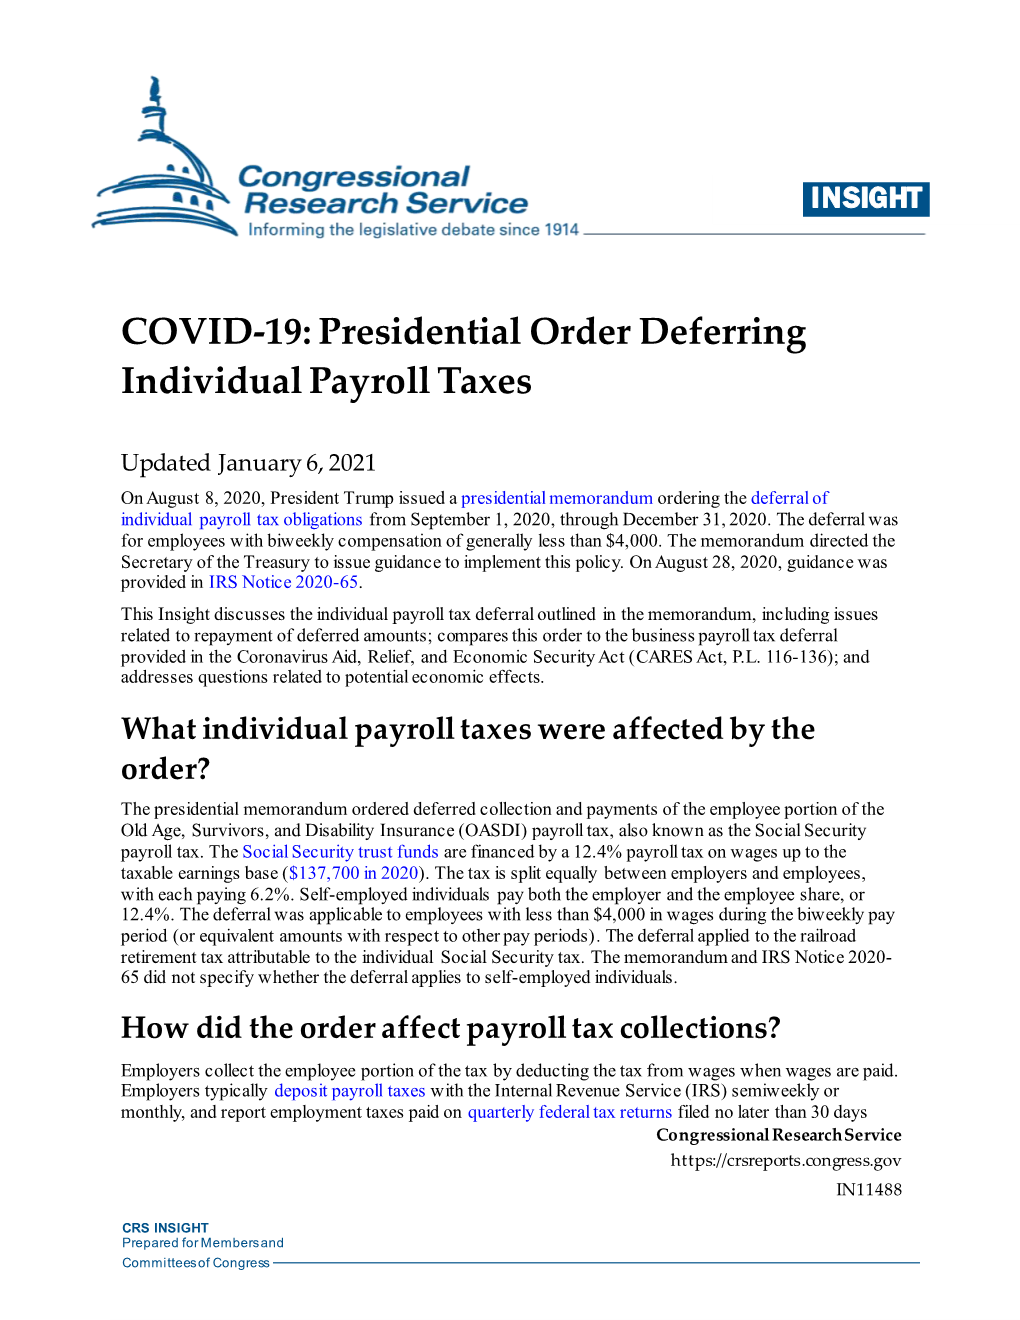 Presidential Order Deferring Individual Payroll Taxes